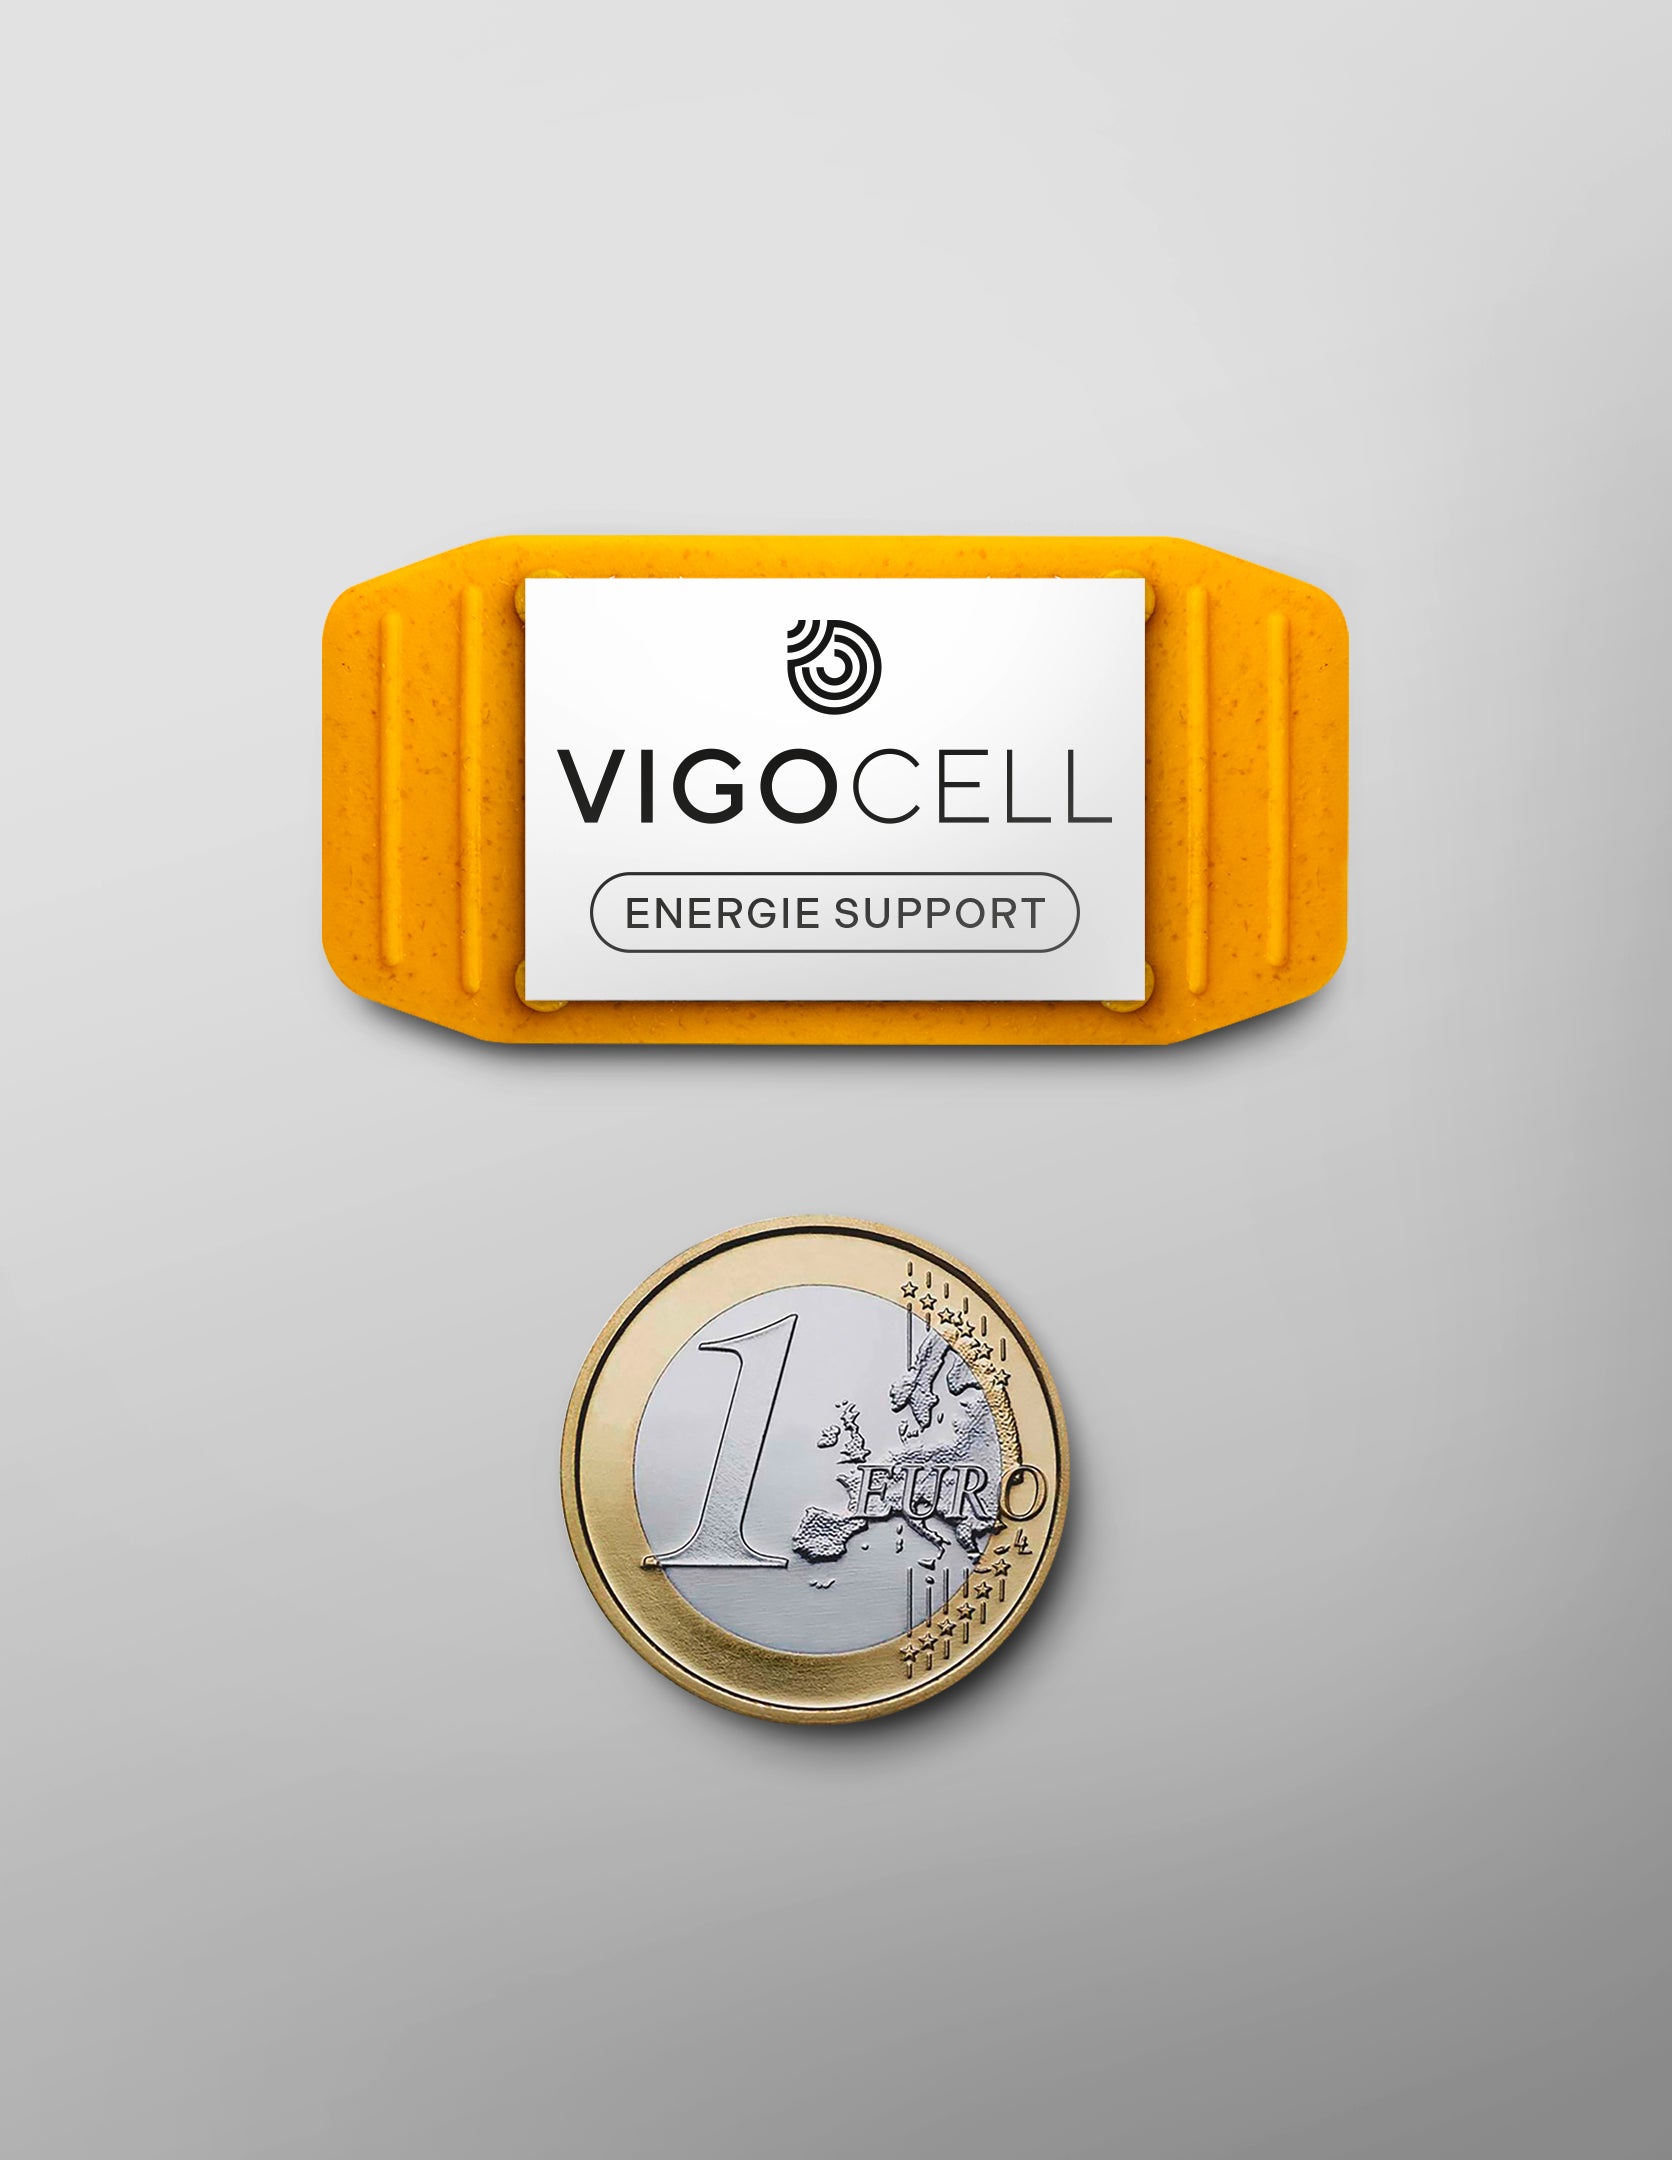 VigoCell Energie Support frequentiechip